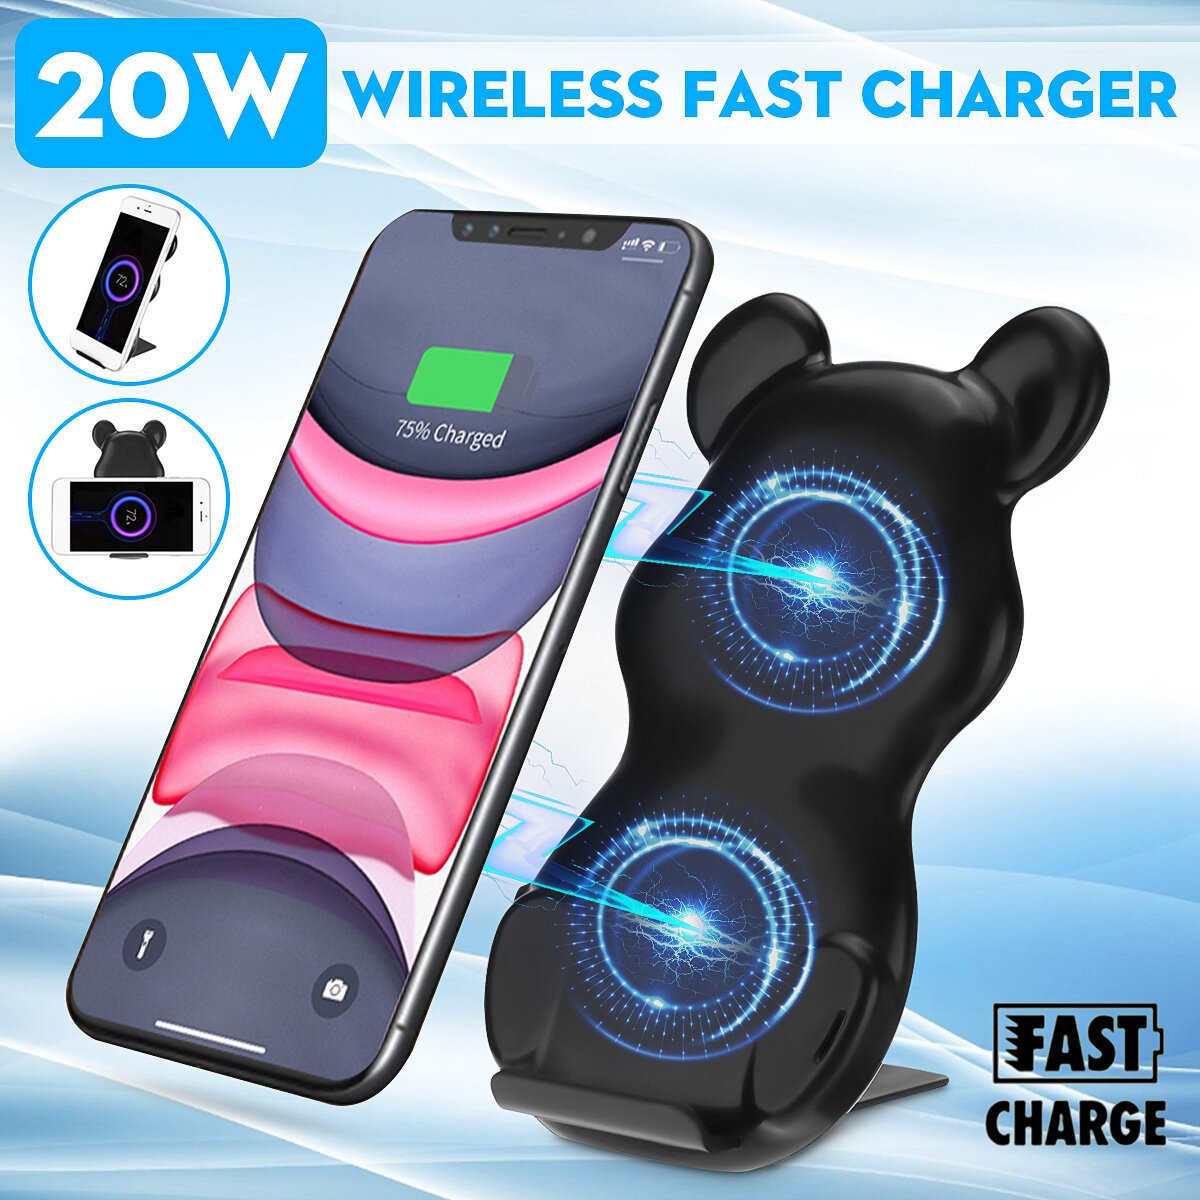 

Bakeey 20W Qi Wireless Fast Charger Charging Dock Station for iPhone 12 for Samsung Galaxy Note S20 ultra Huawei Mate40